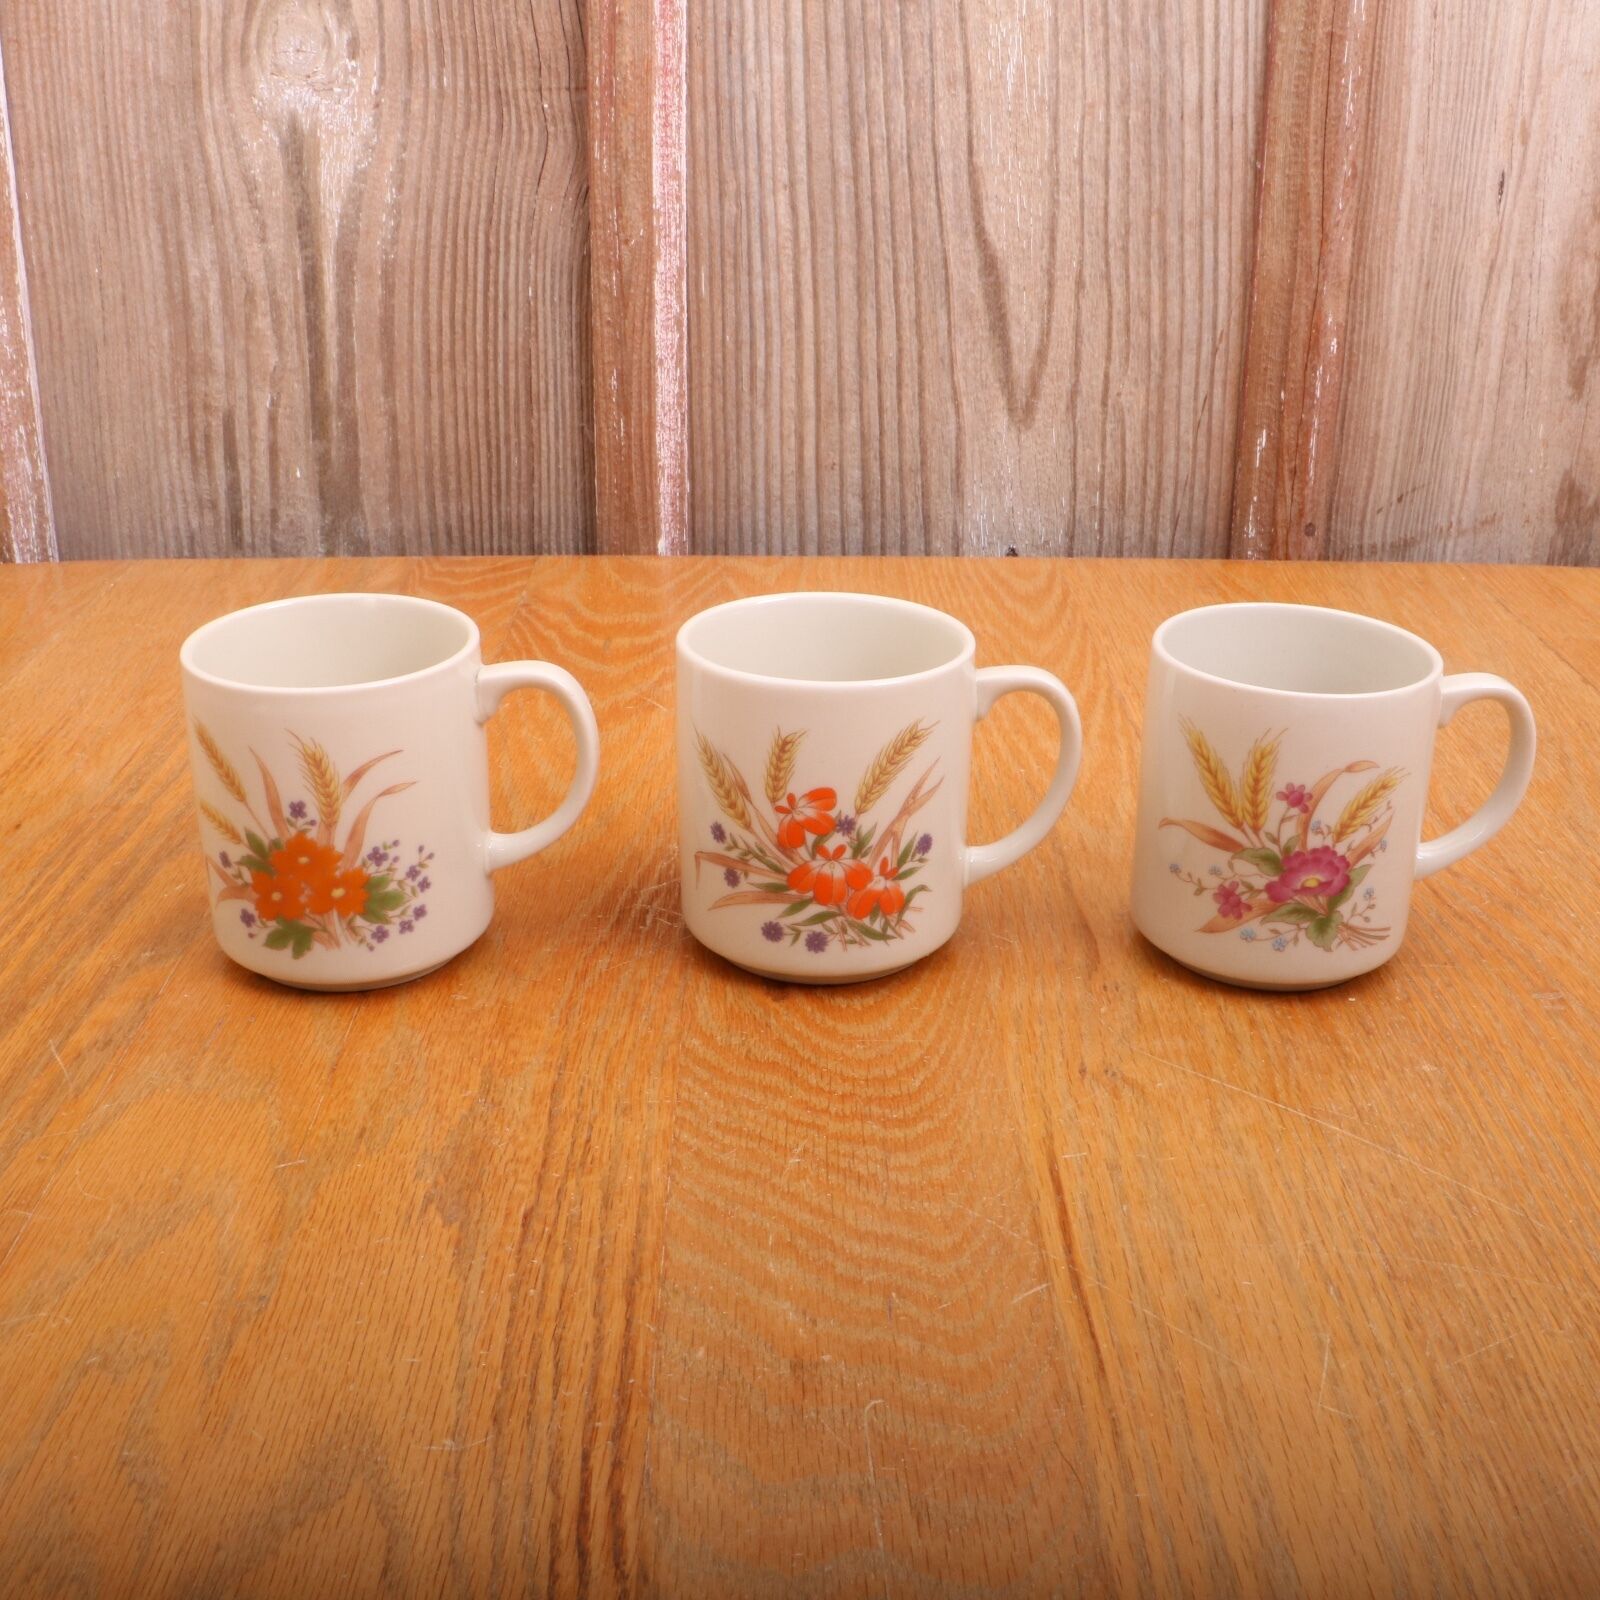 3 Floral Made In Japan Collectible Coffee Mug Tea Cups